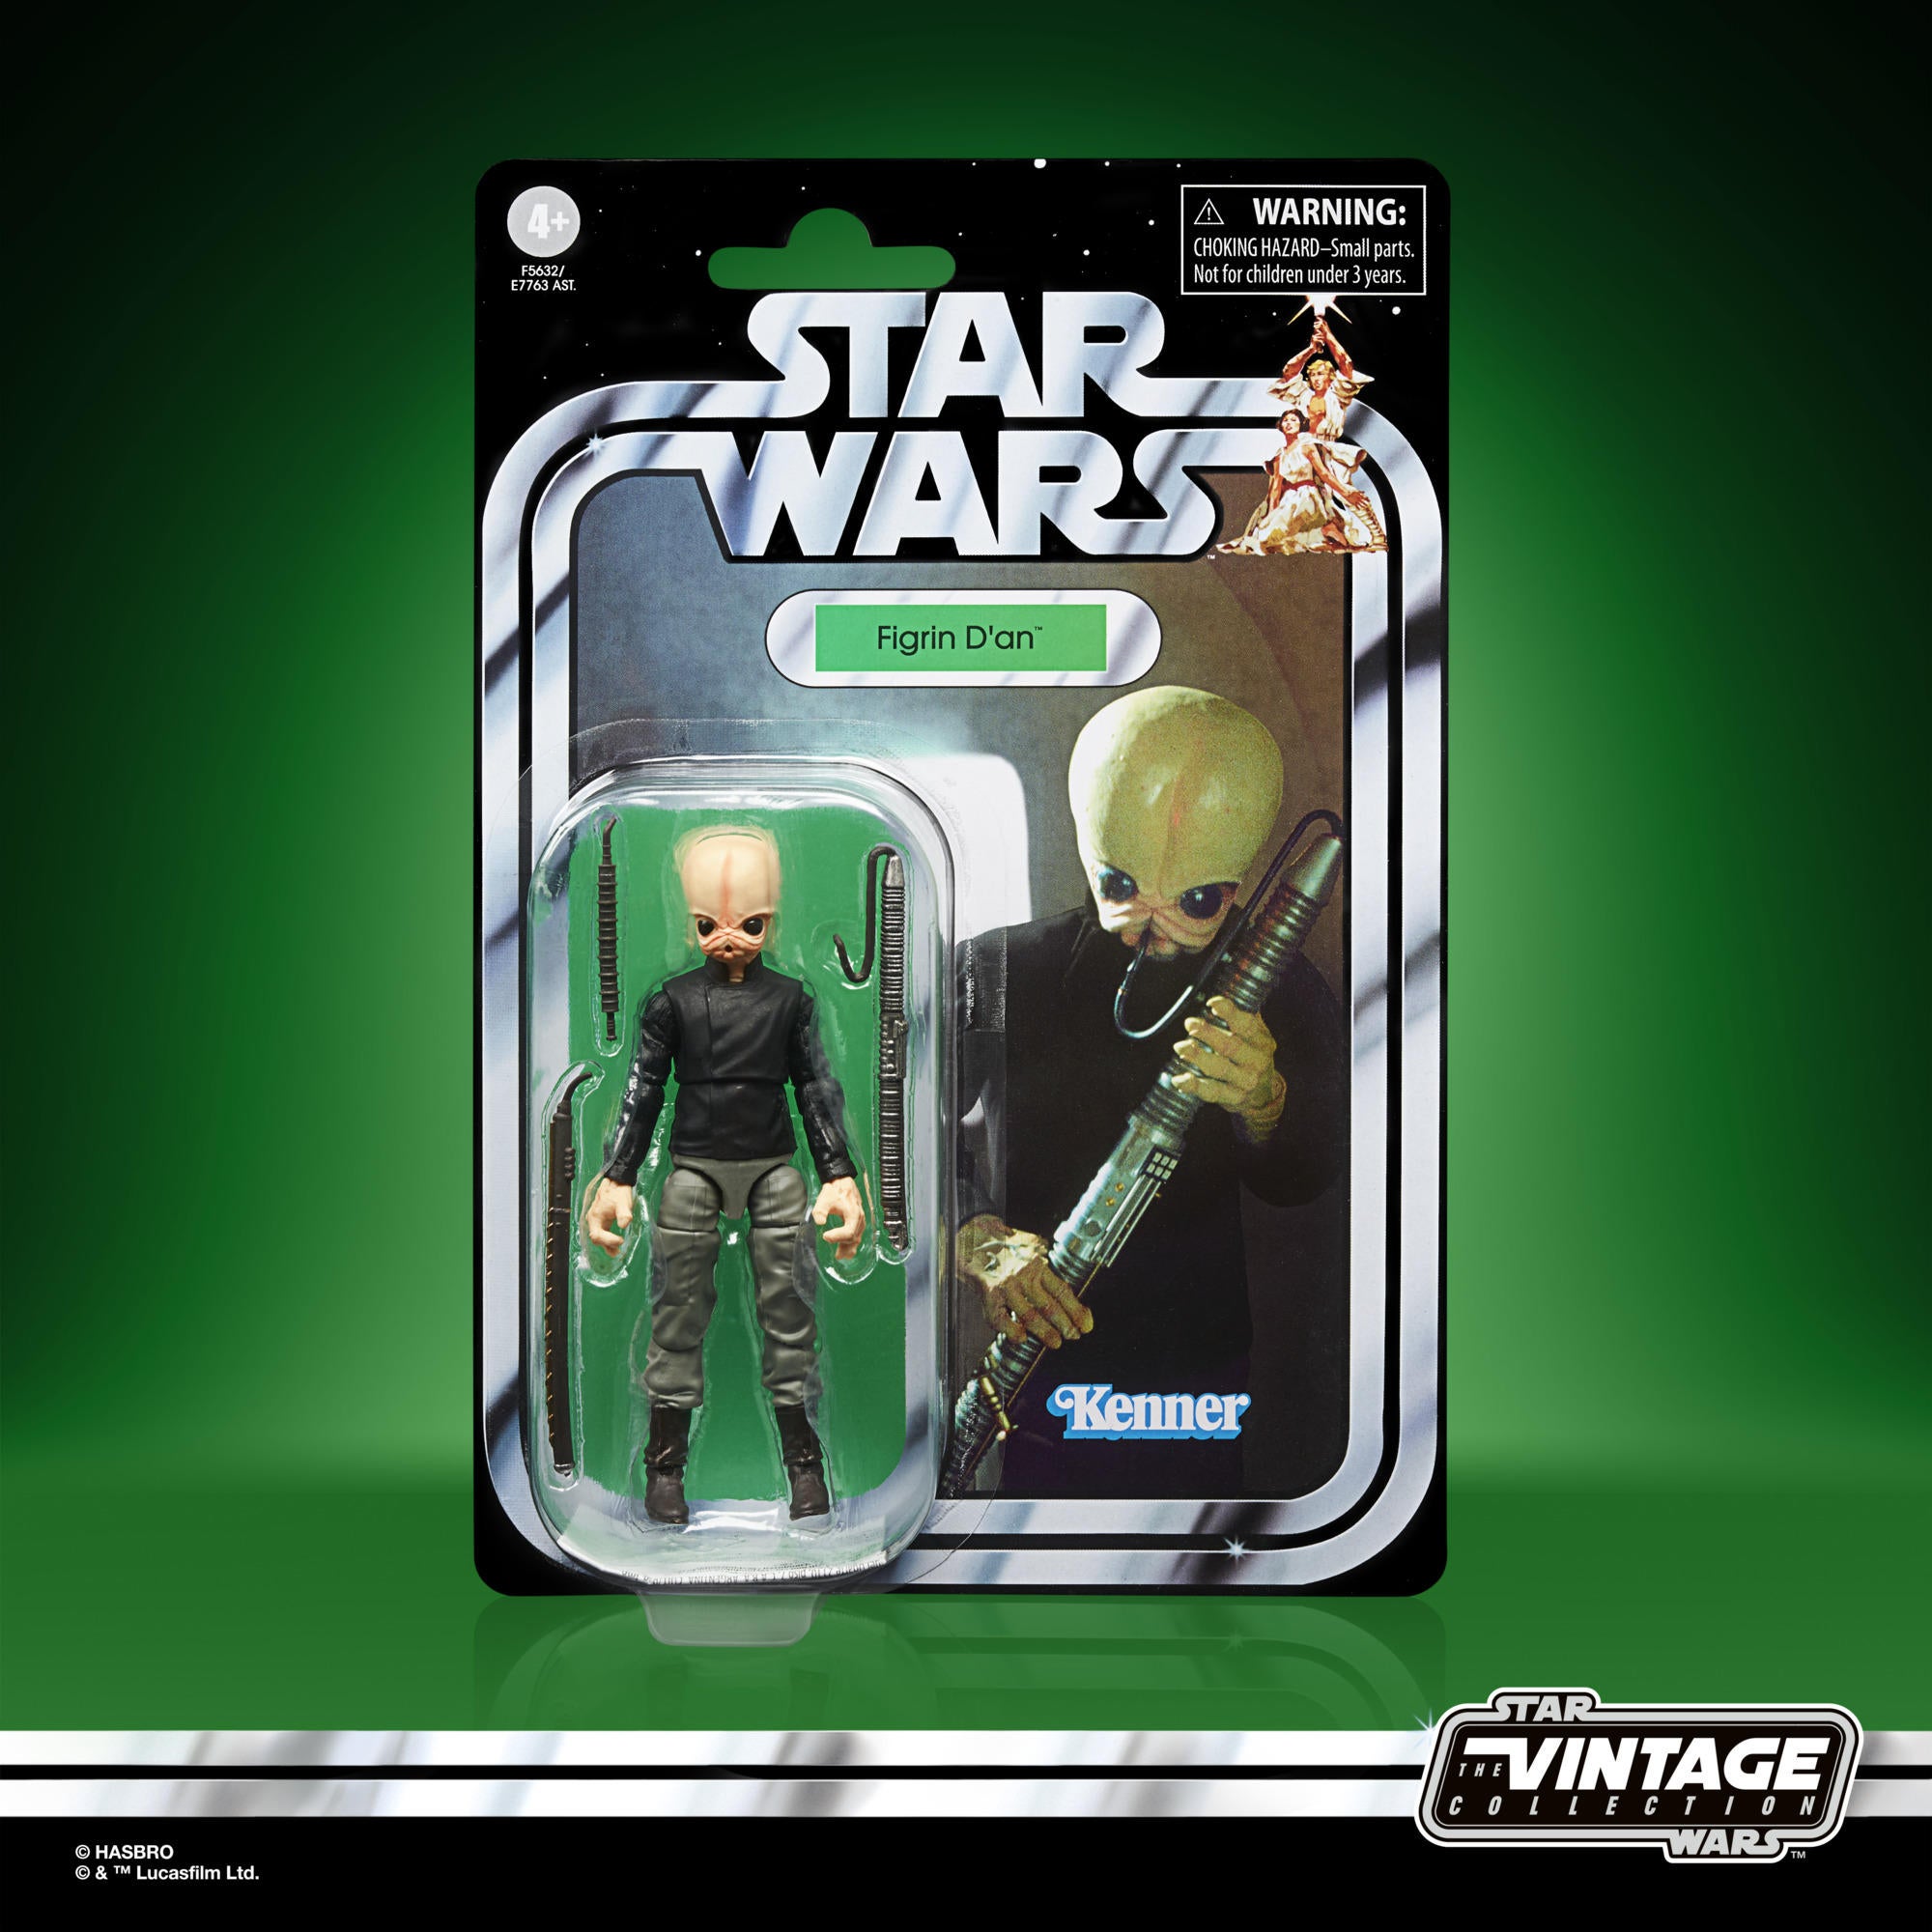 star-wars-the-vintage-collection-3-75-inch-figrin-dan-figure-package.jpg